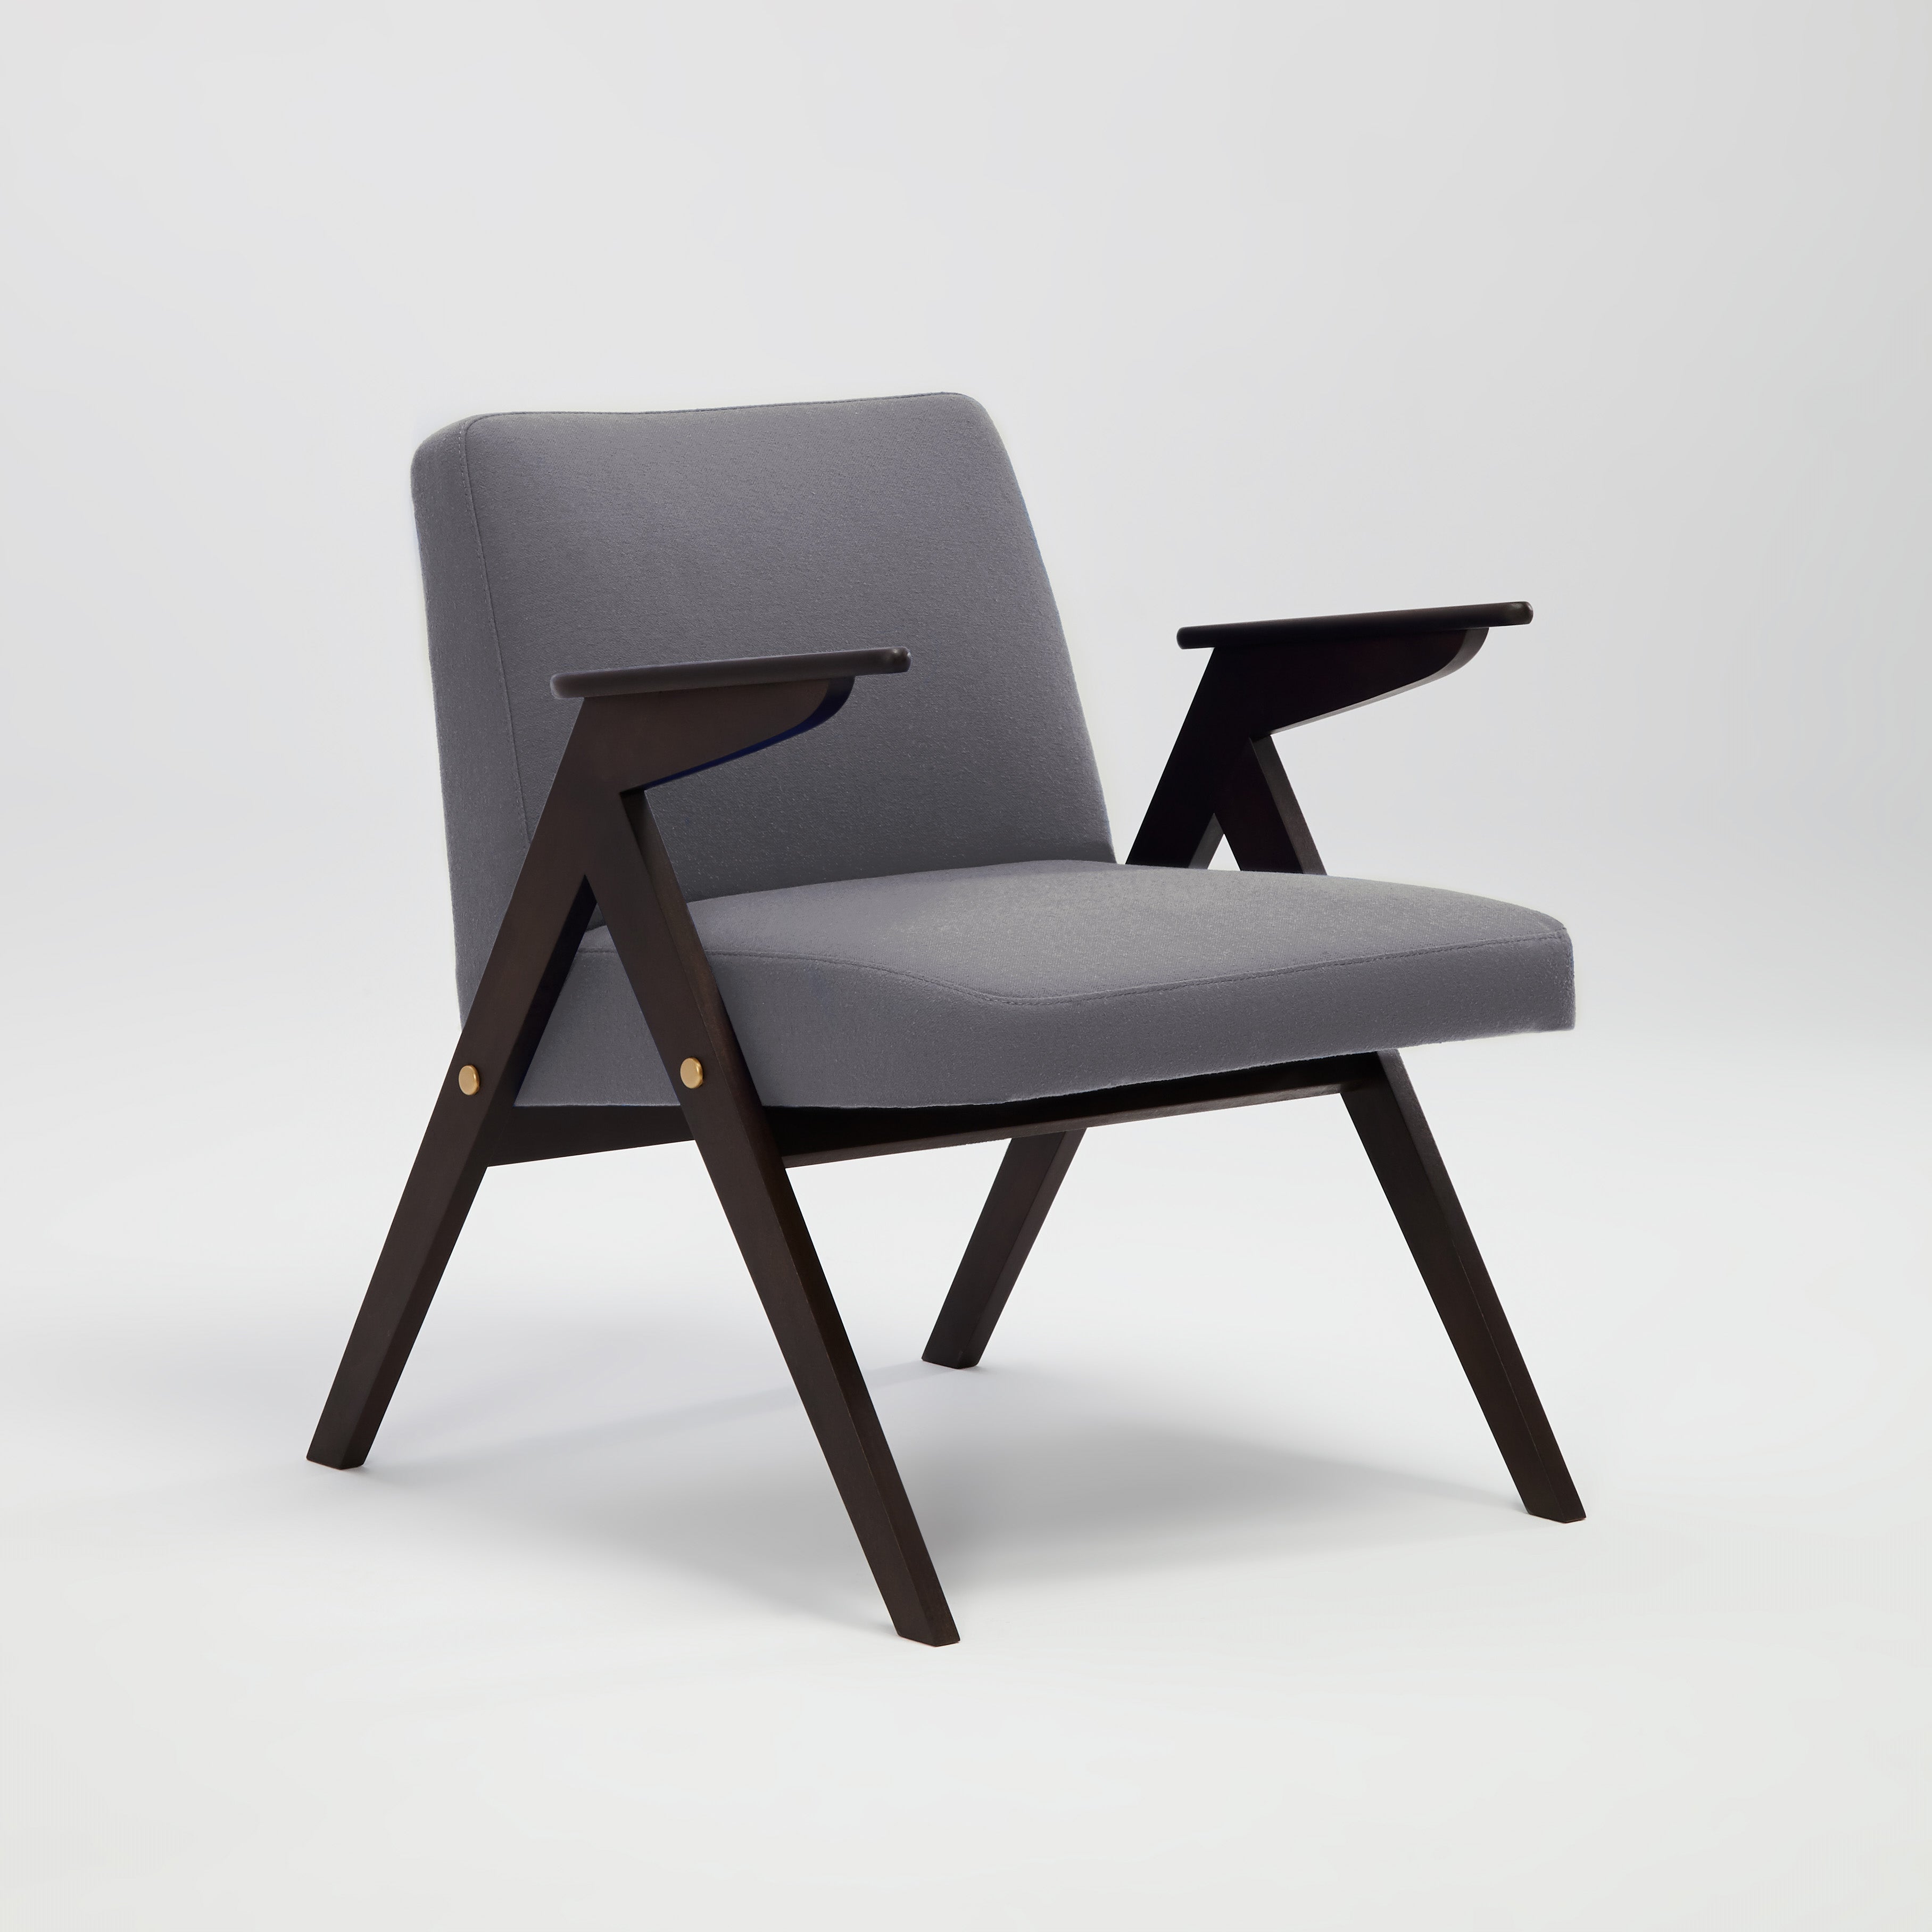 JUNCO Chair black beech wood upholstery colour grey